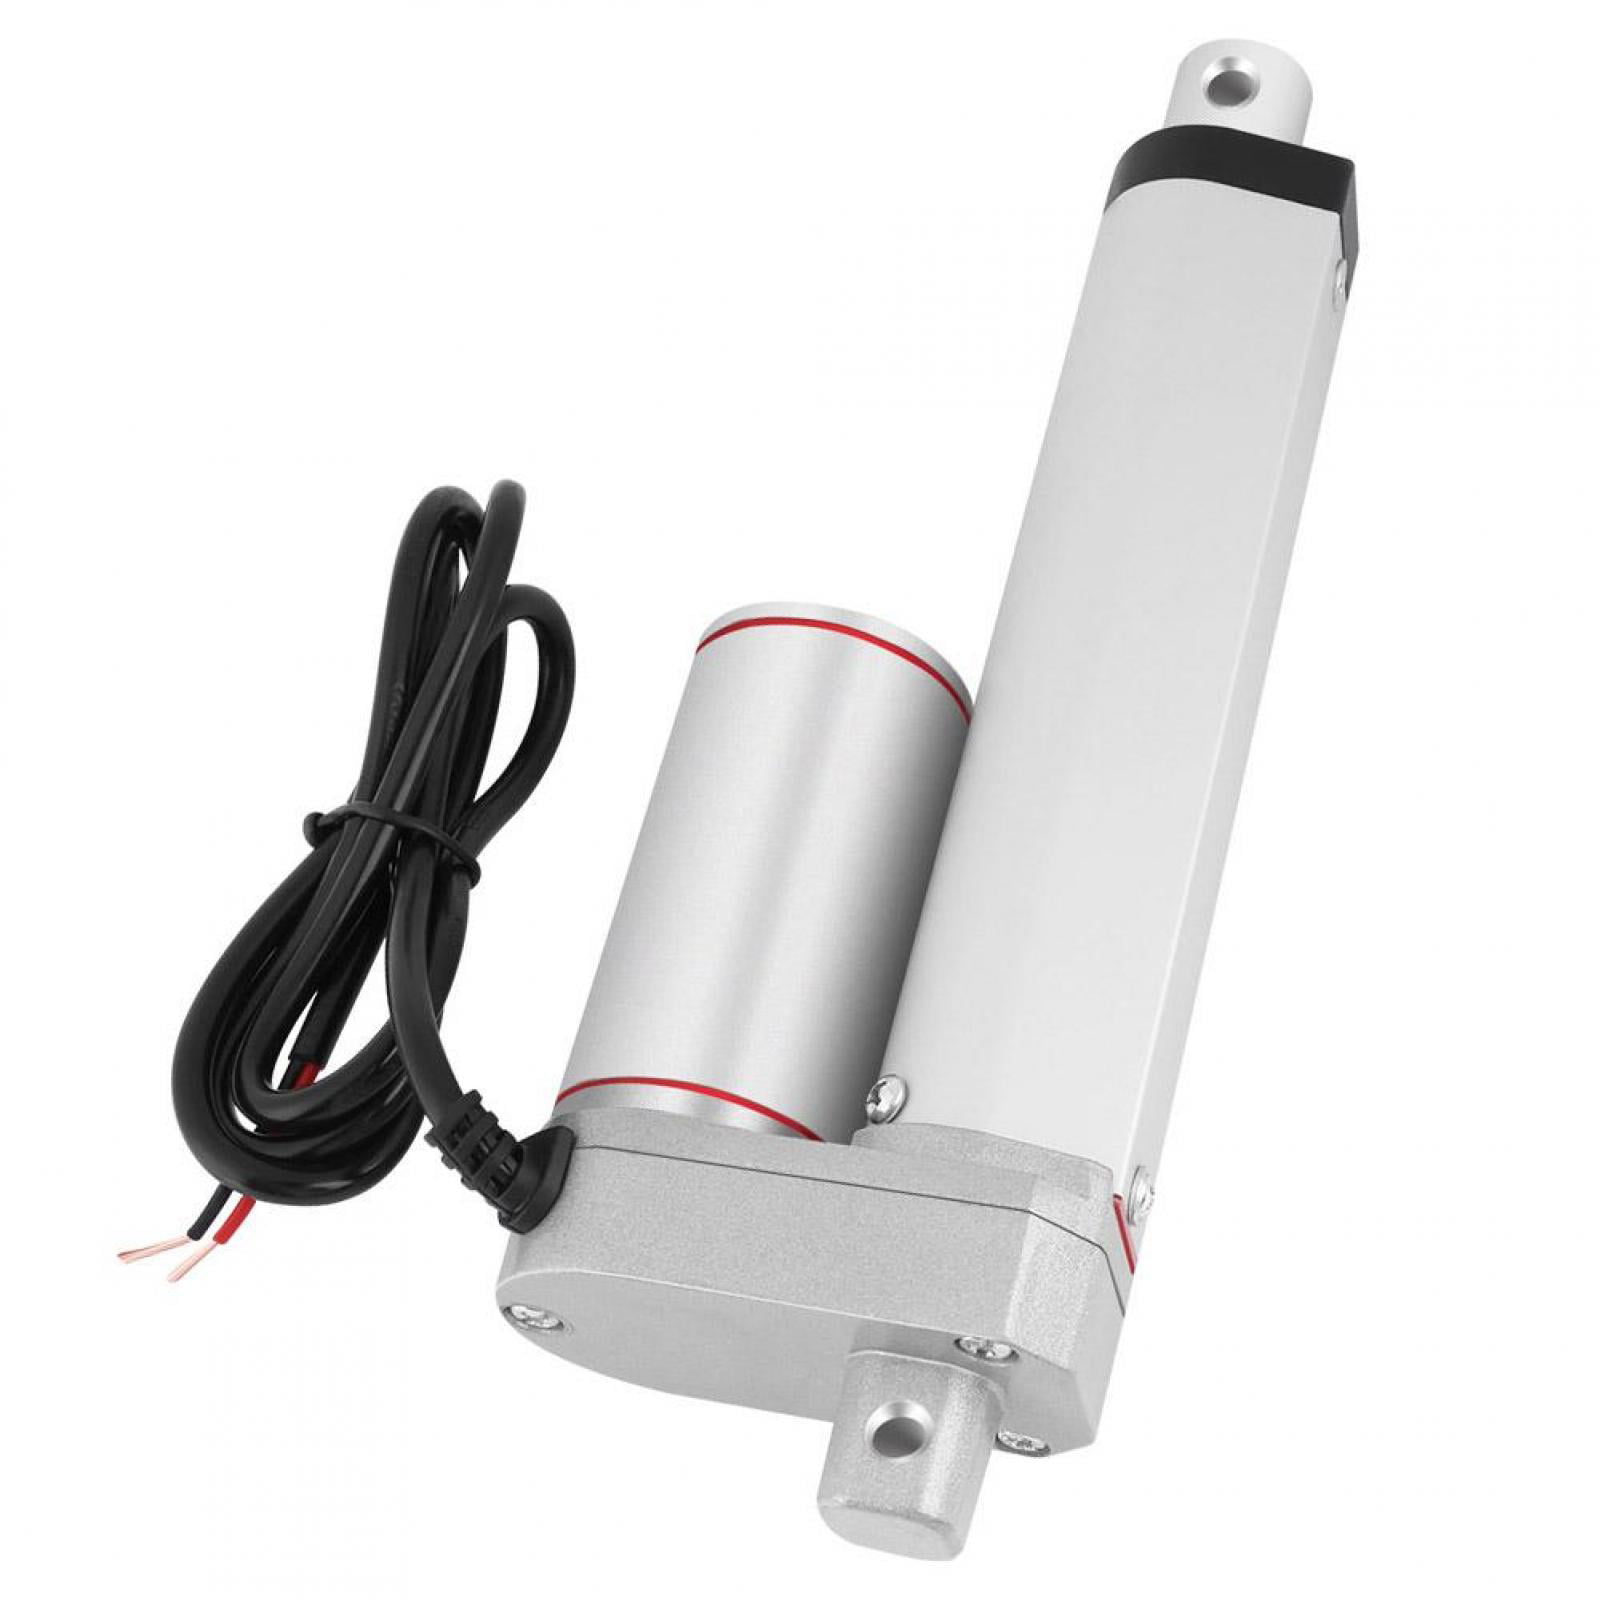 Walfront 100mm Stroke Linear Actuator 24V Small Electric Linear Actuator Cylinder Lift Stroke Heavy Duty 750N Maximum Push Linear Actuator with Mounting Brackets 